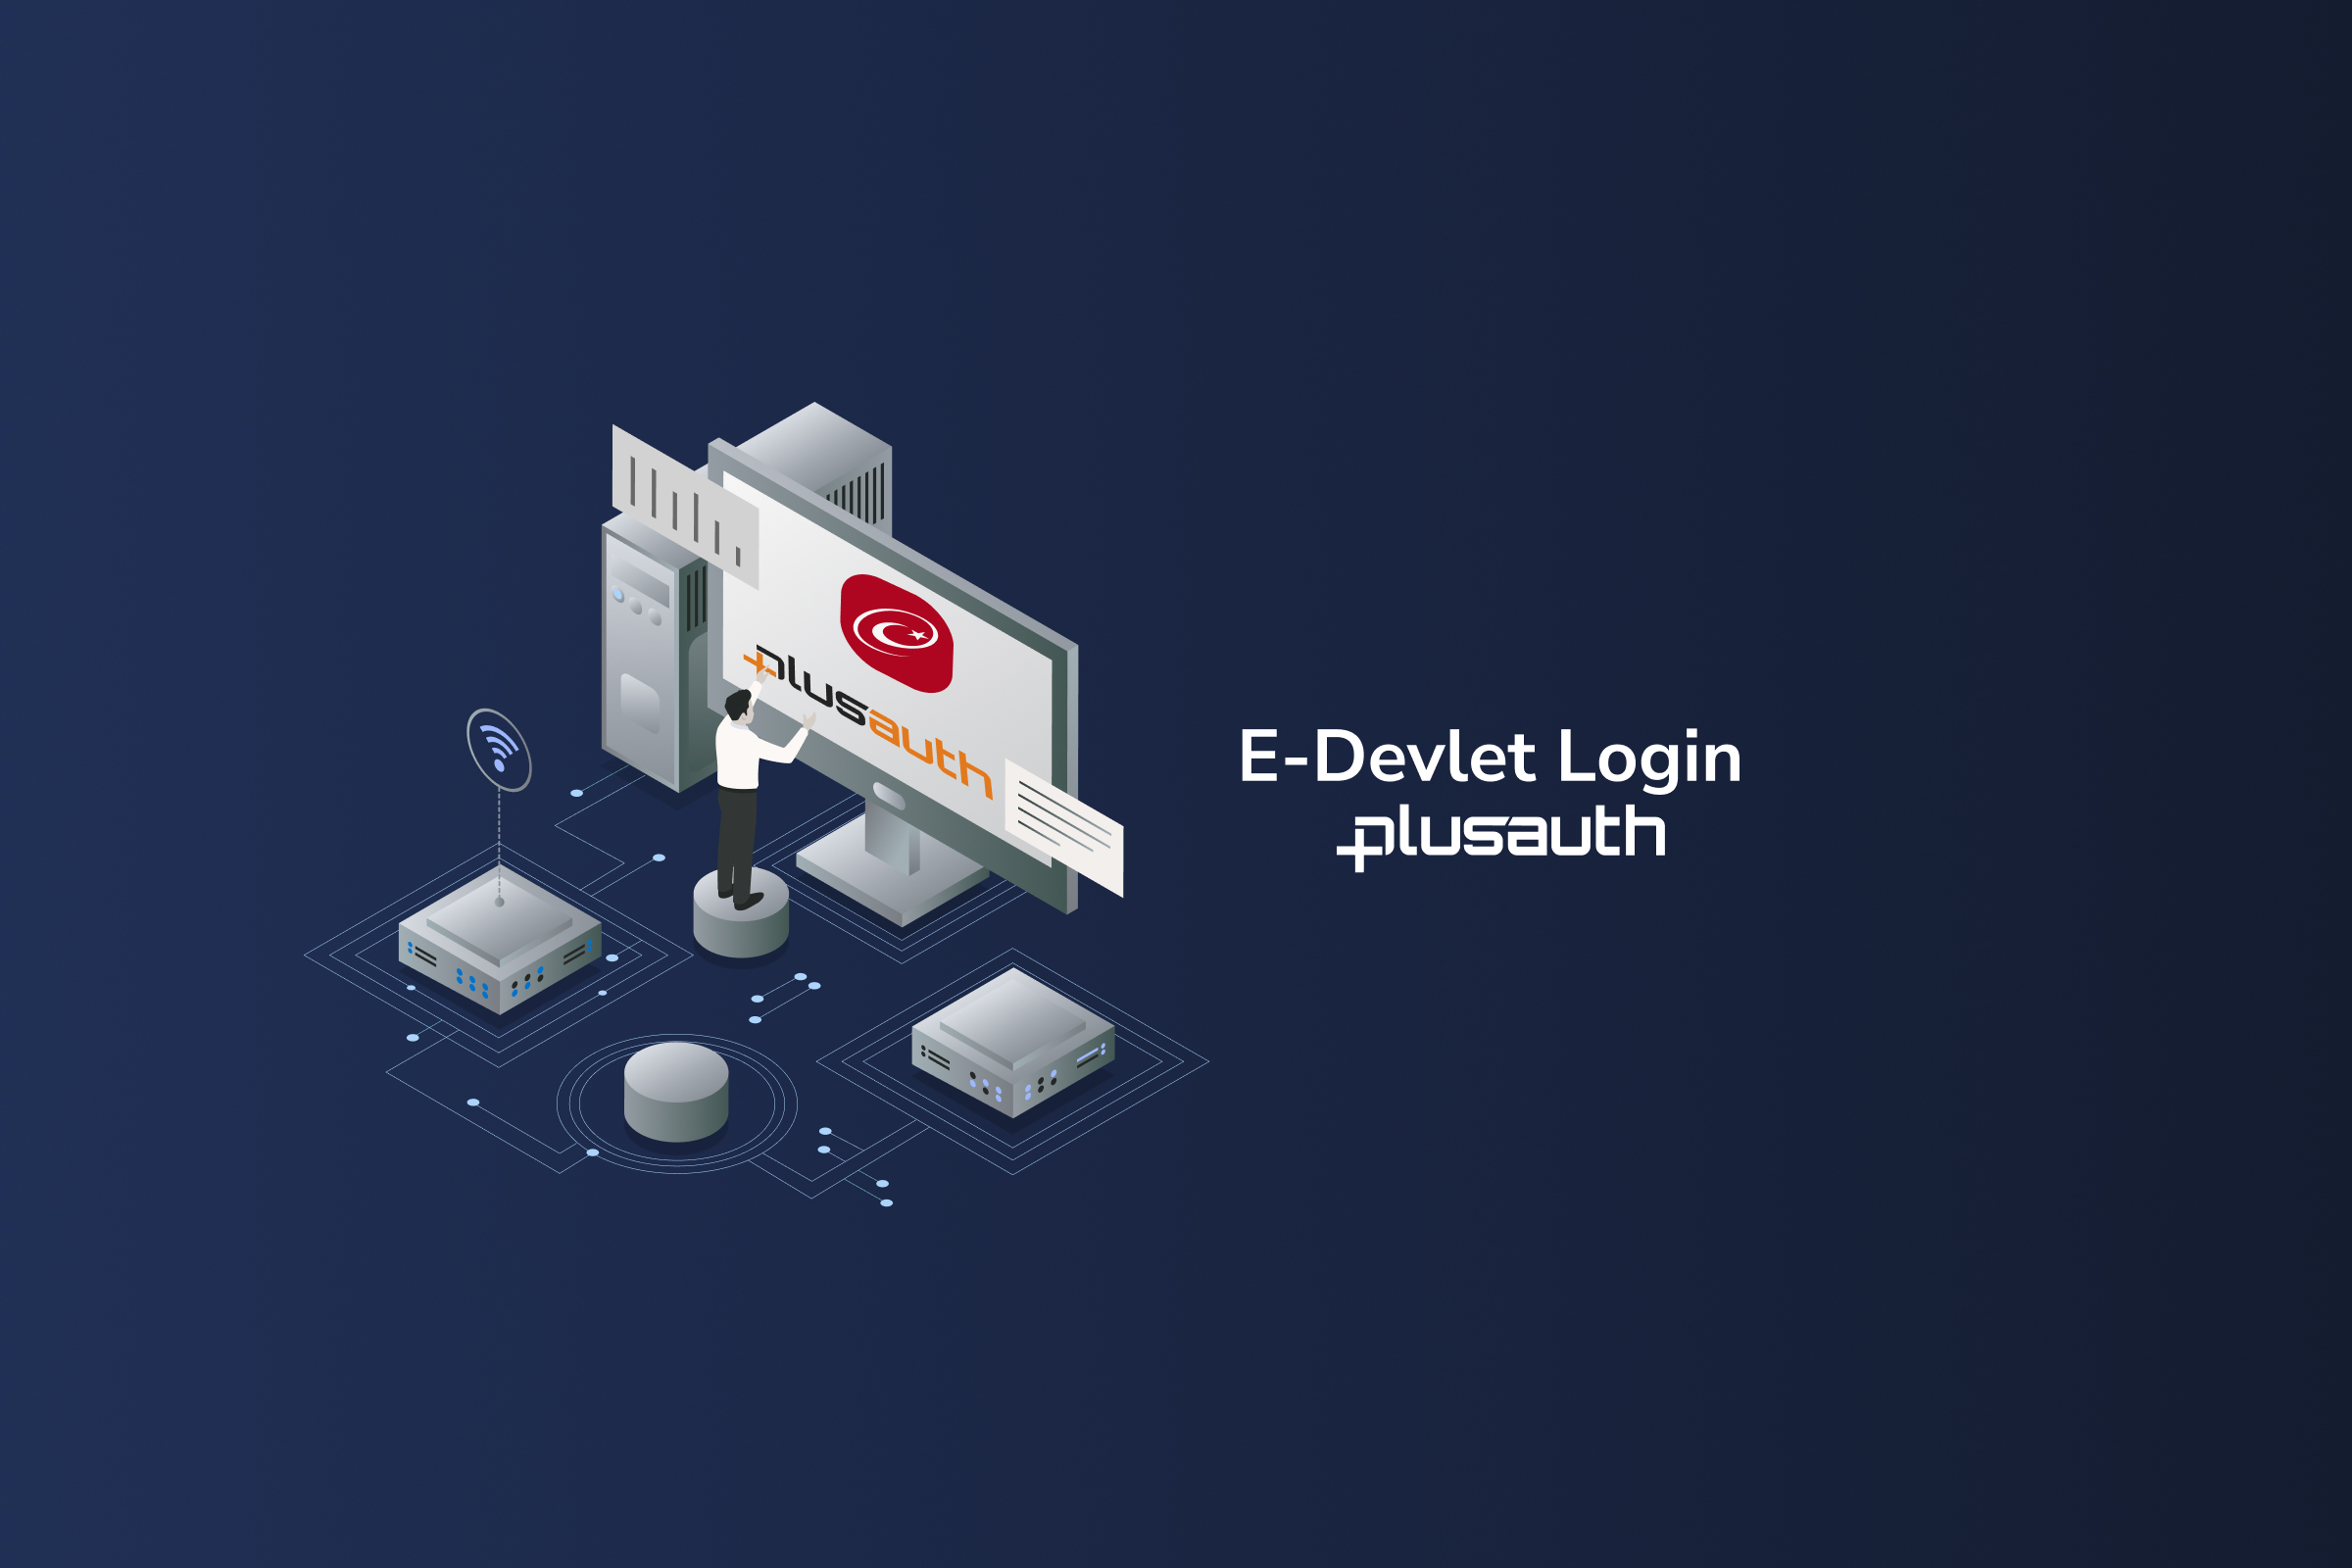 PlusAuth now supports e-Devlet login